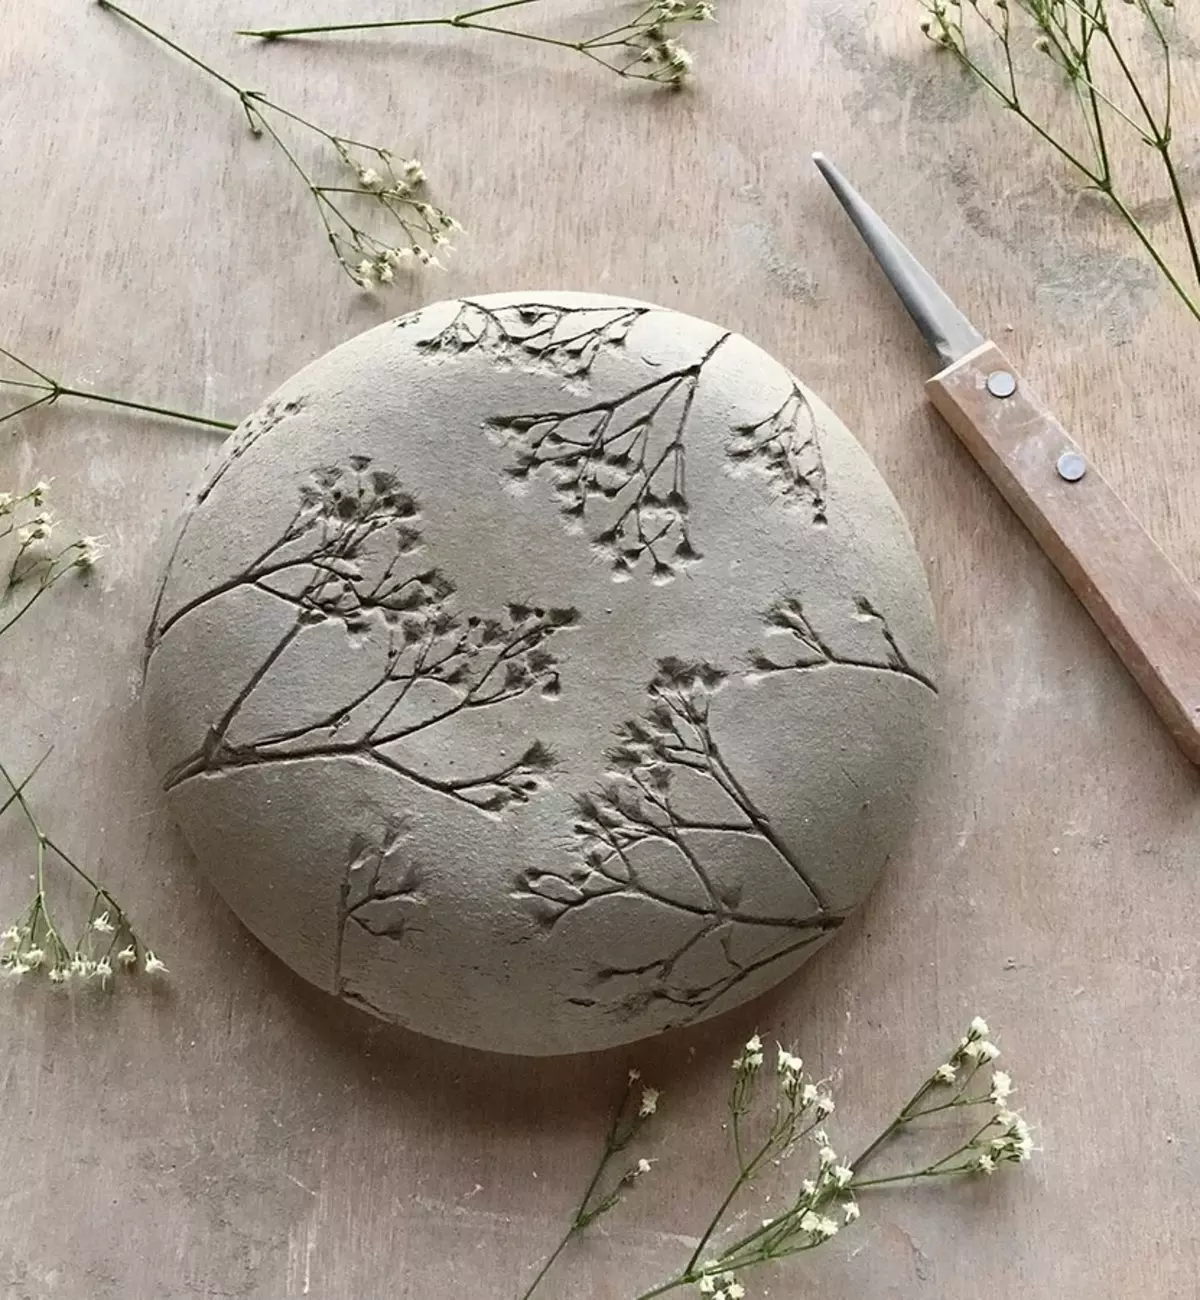 Ceramics with patterns created by nature: Needlework Instagram Week